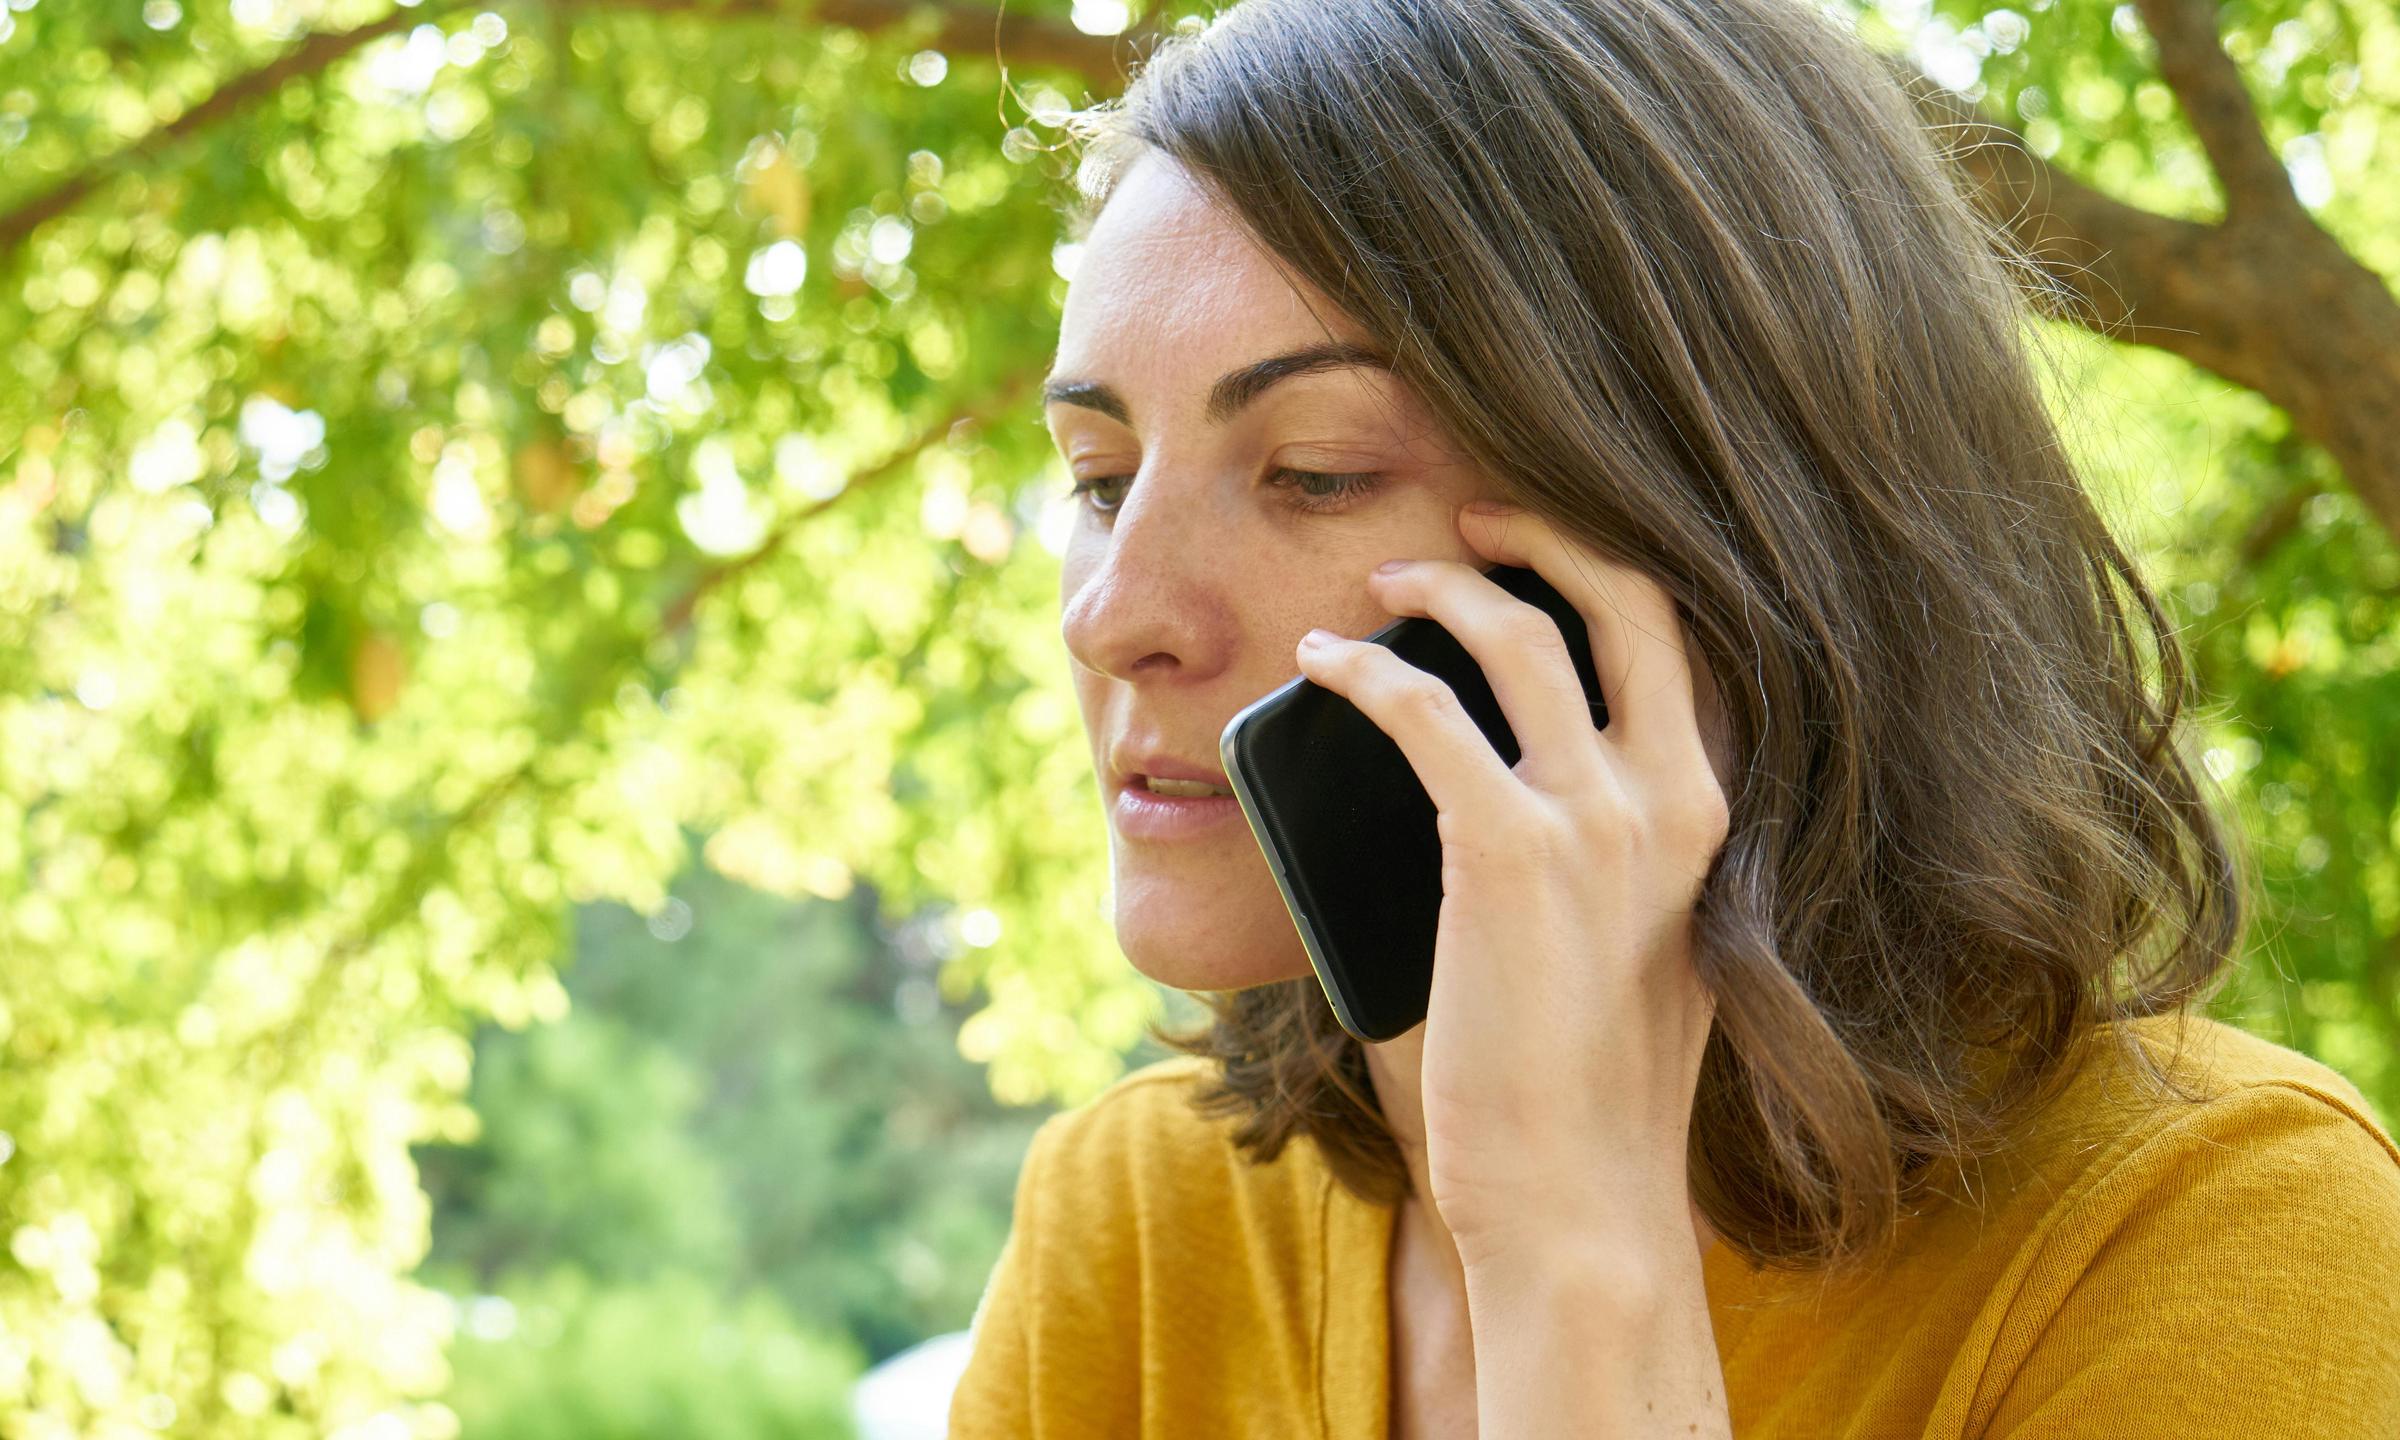 A woman making a call on a cell phone outdoors | Source: Pexels